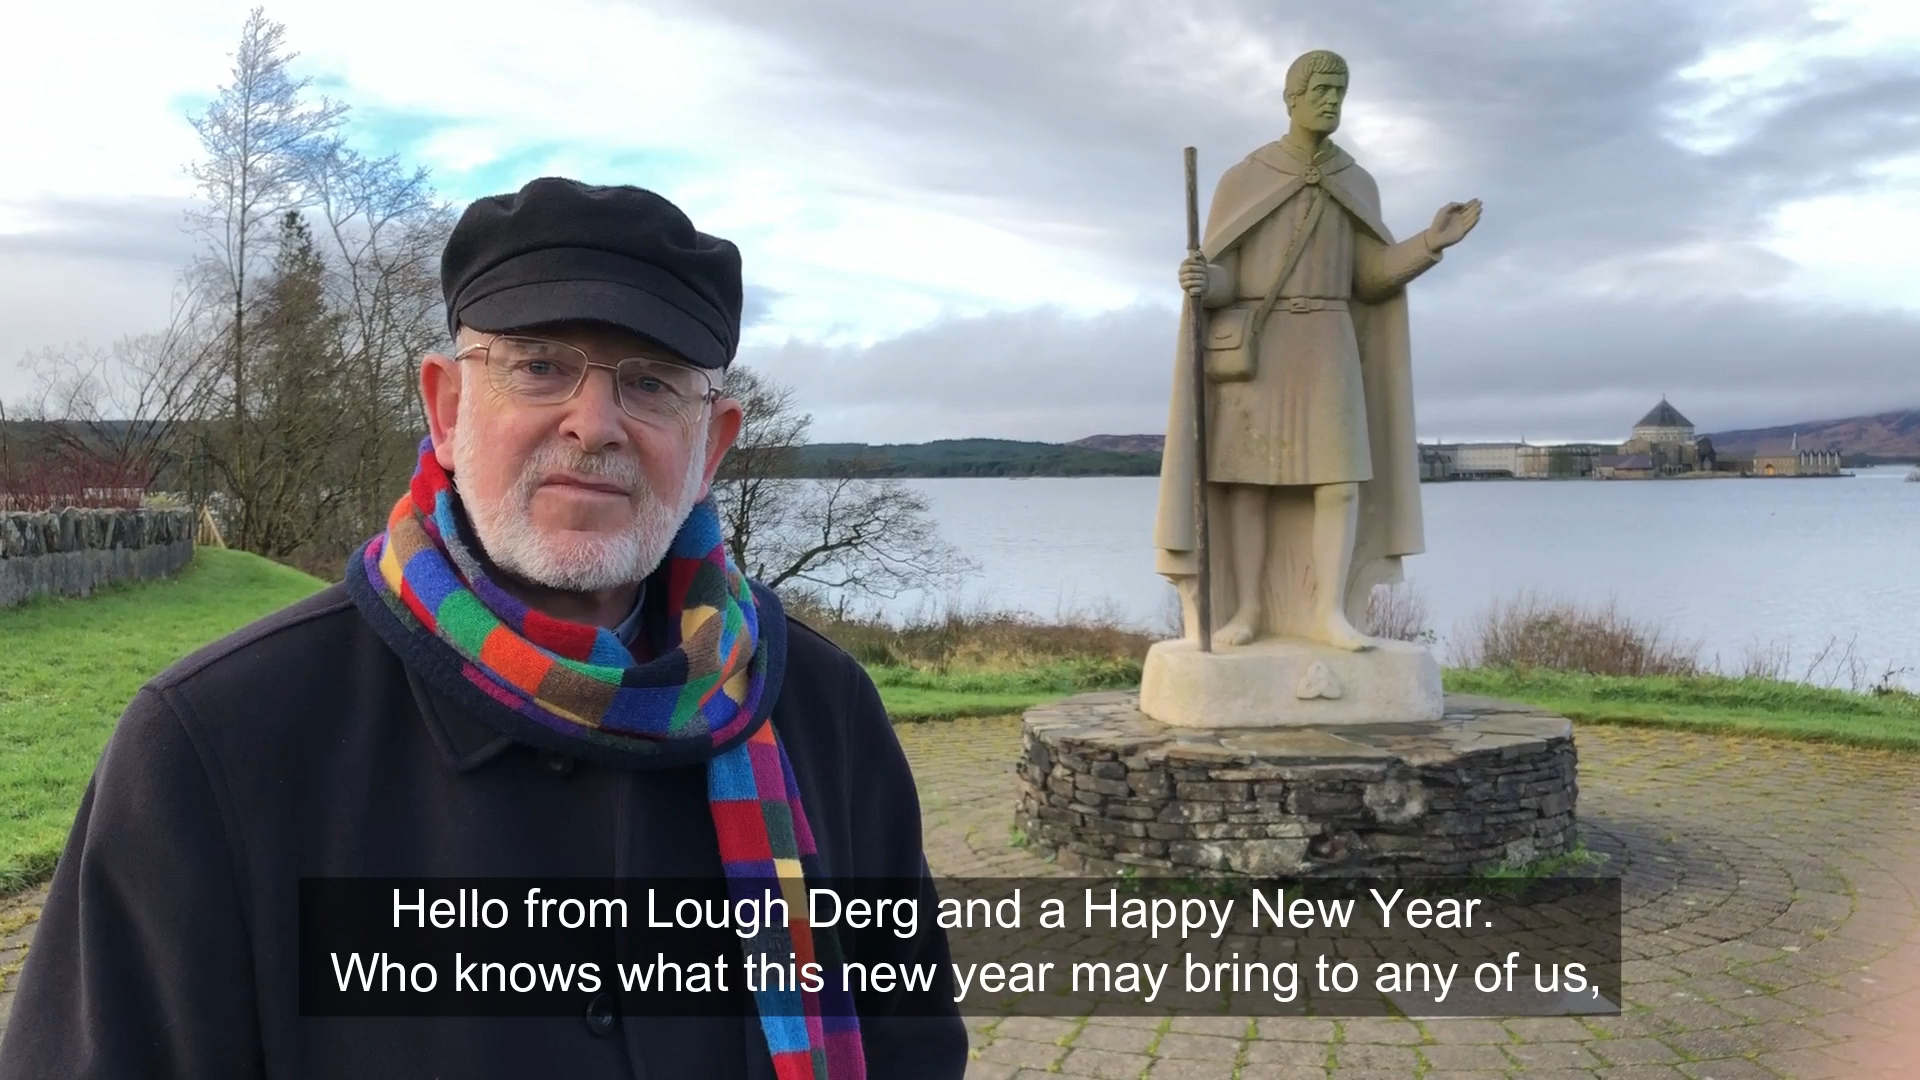 The Prior, Fr La, shares his New Year message for 2019